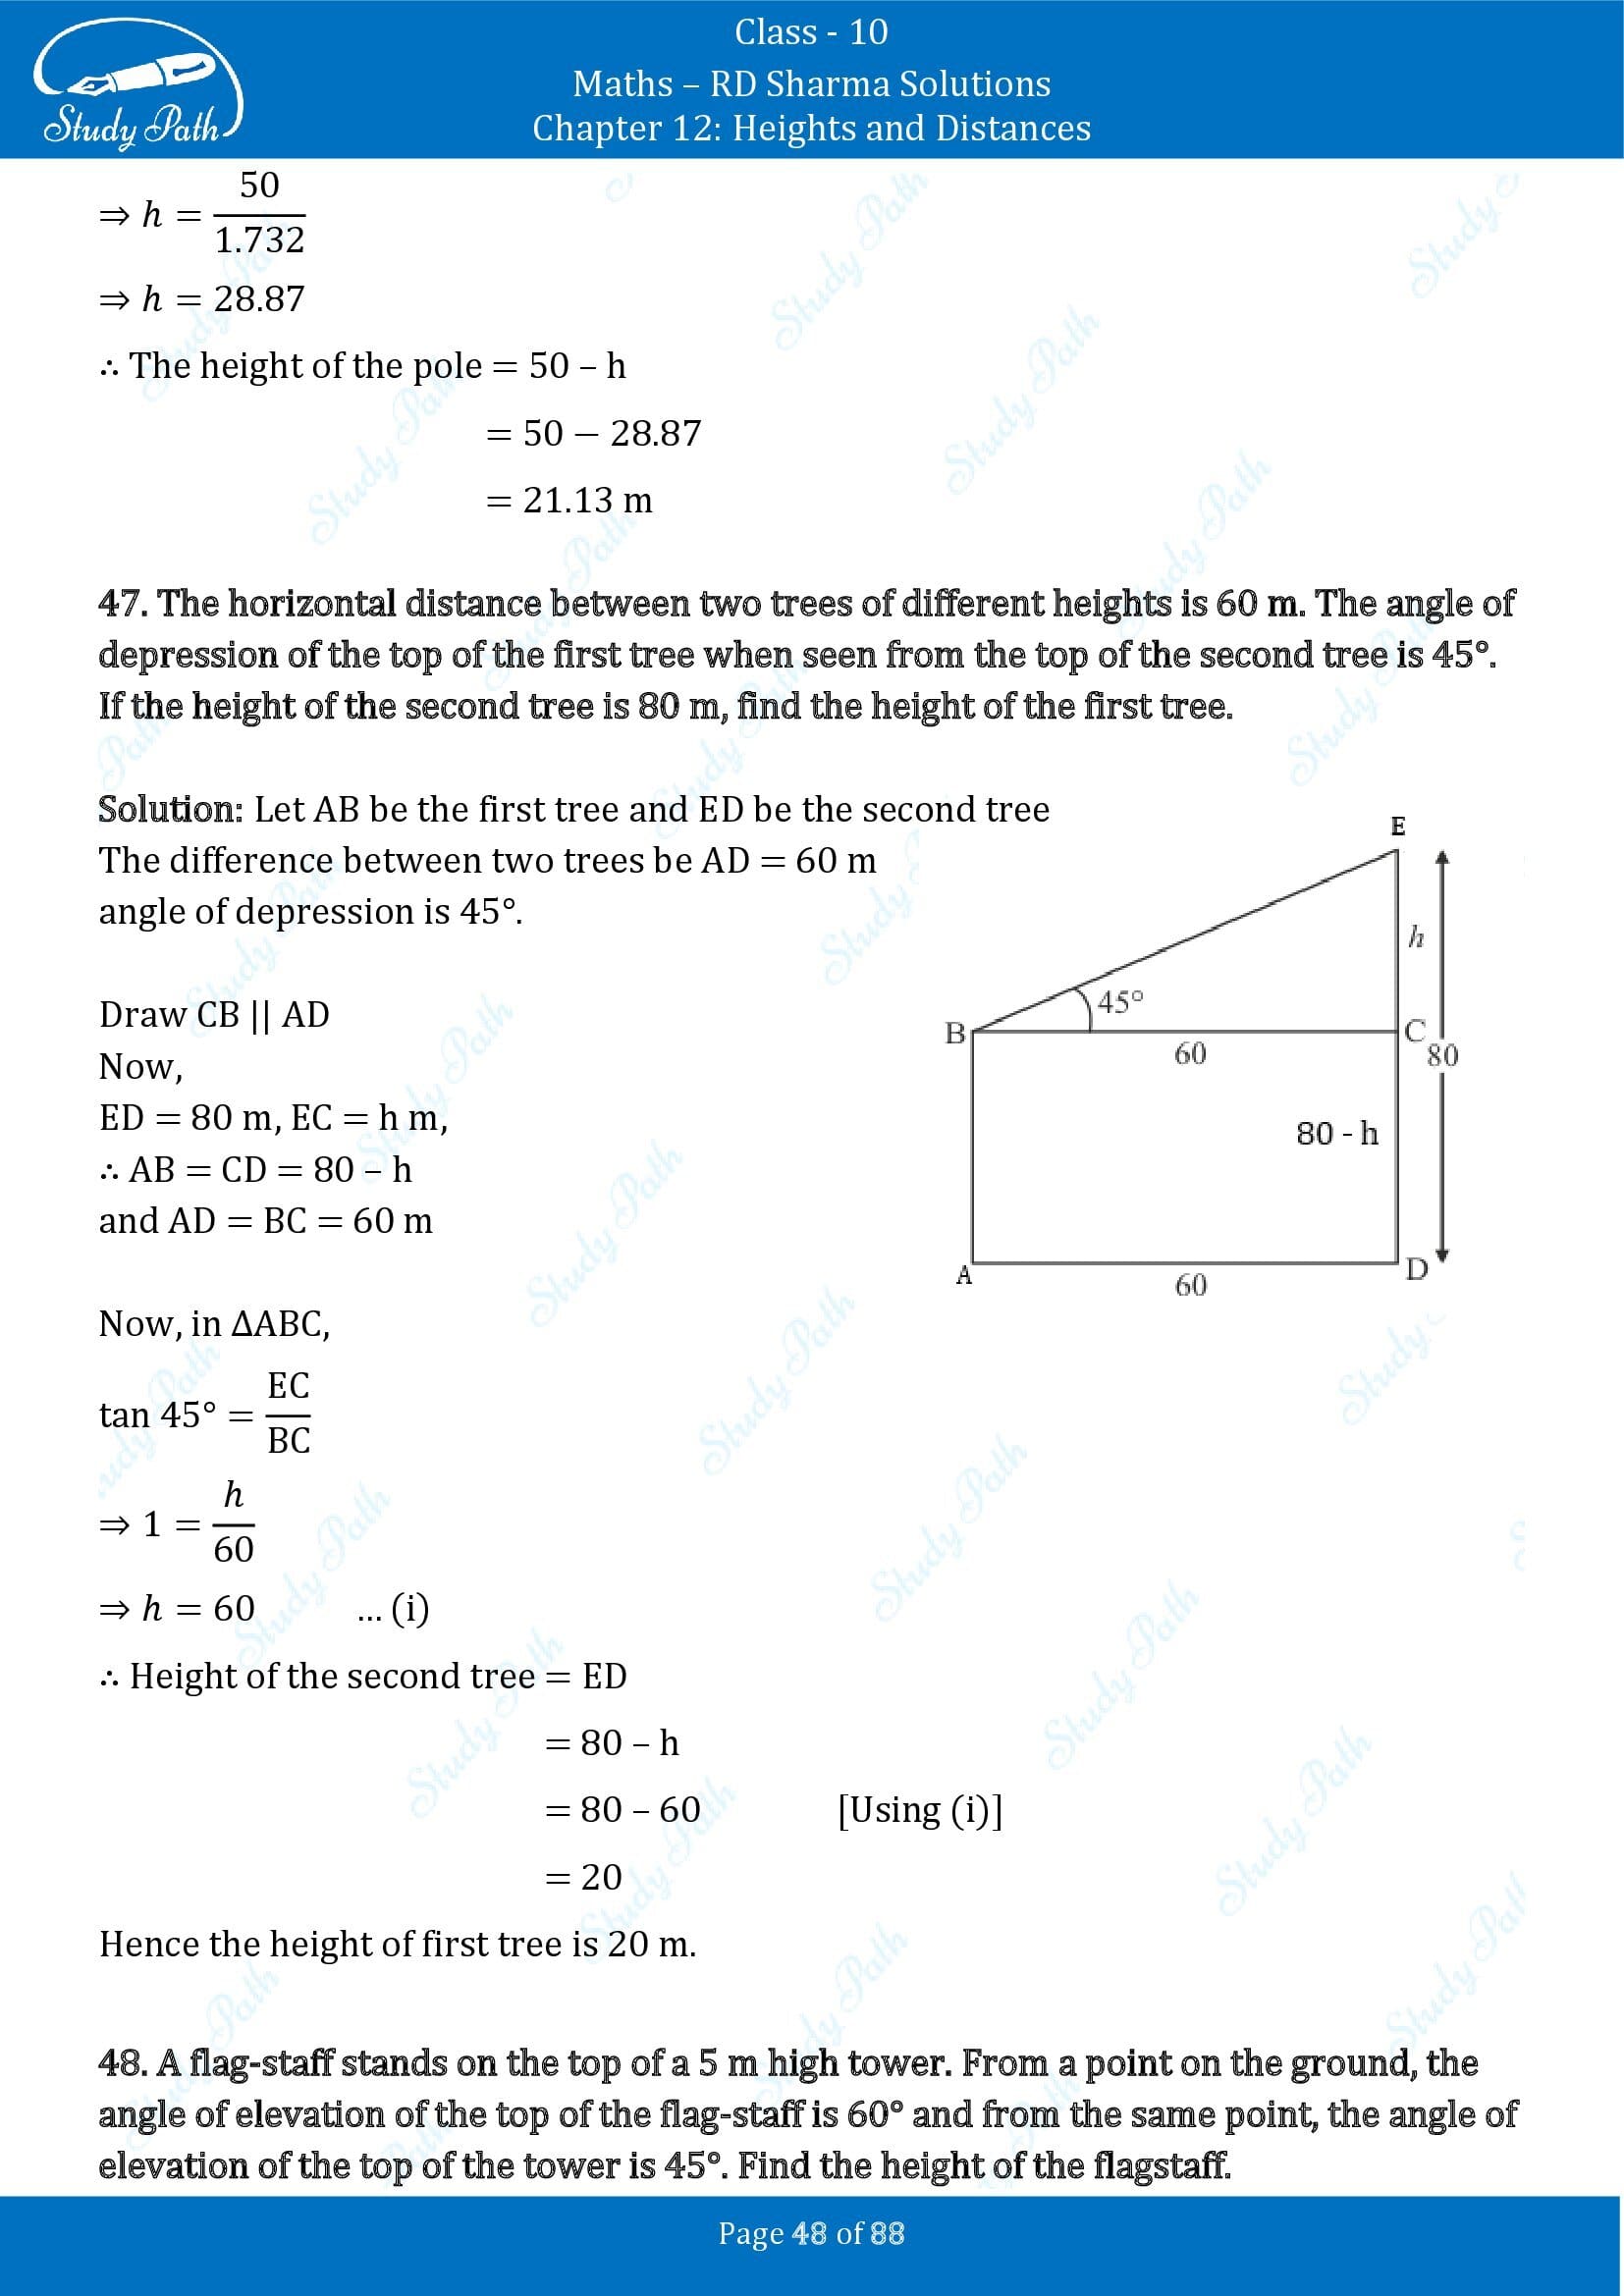 RD Sharma Solutions Class 10 Chapter 12 Heights and Distances Exercise 12.1 00048